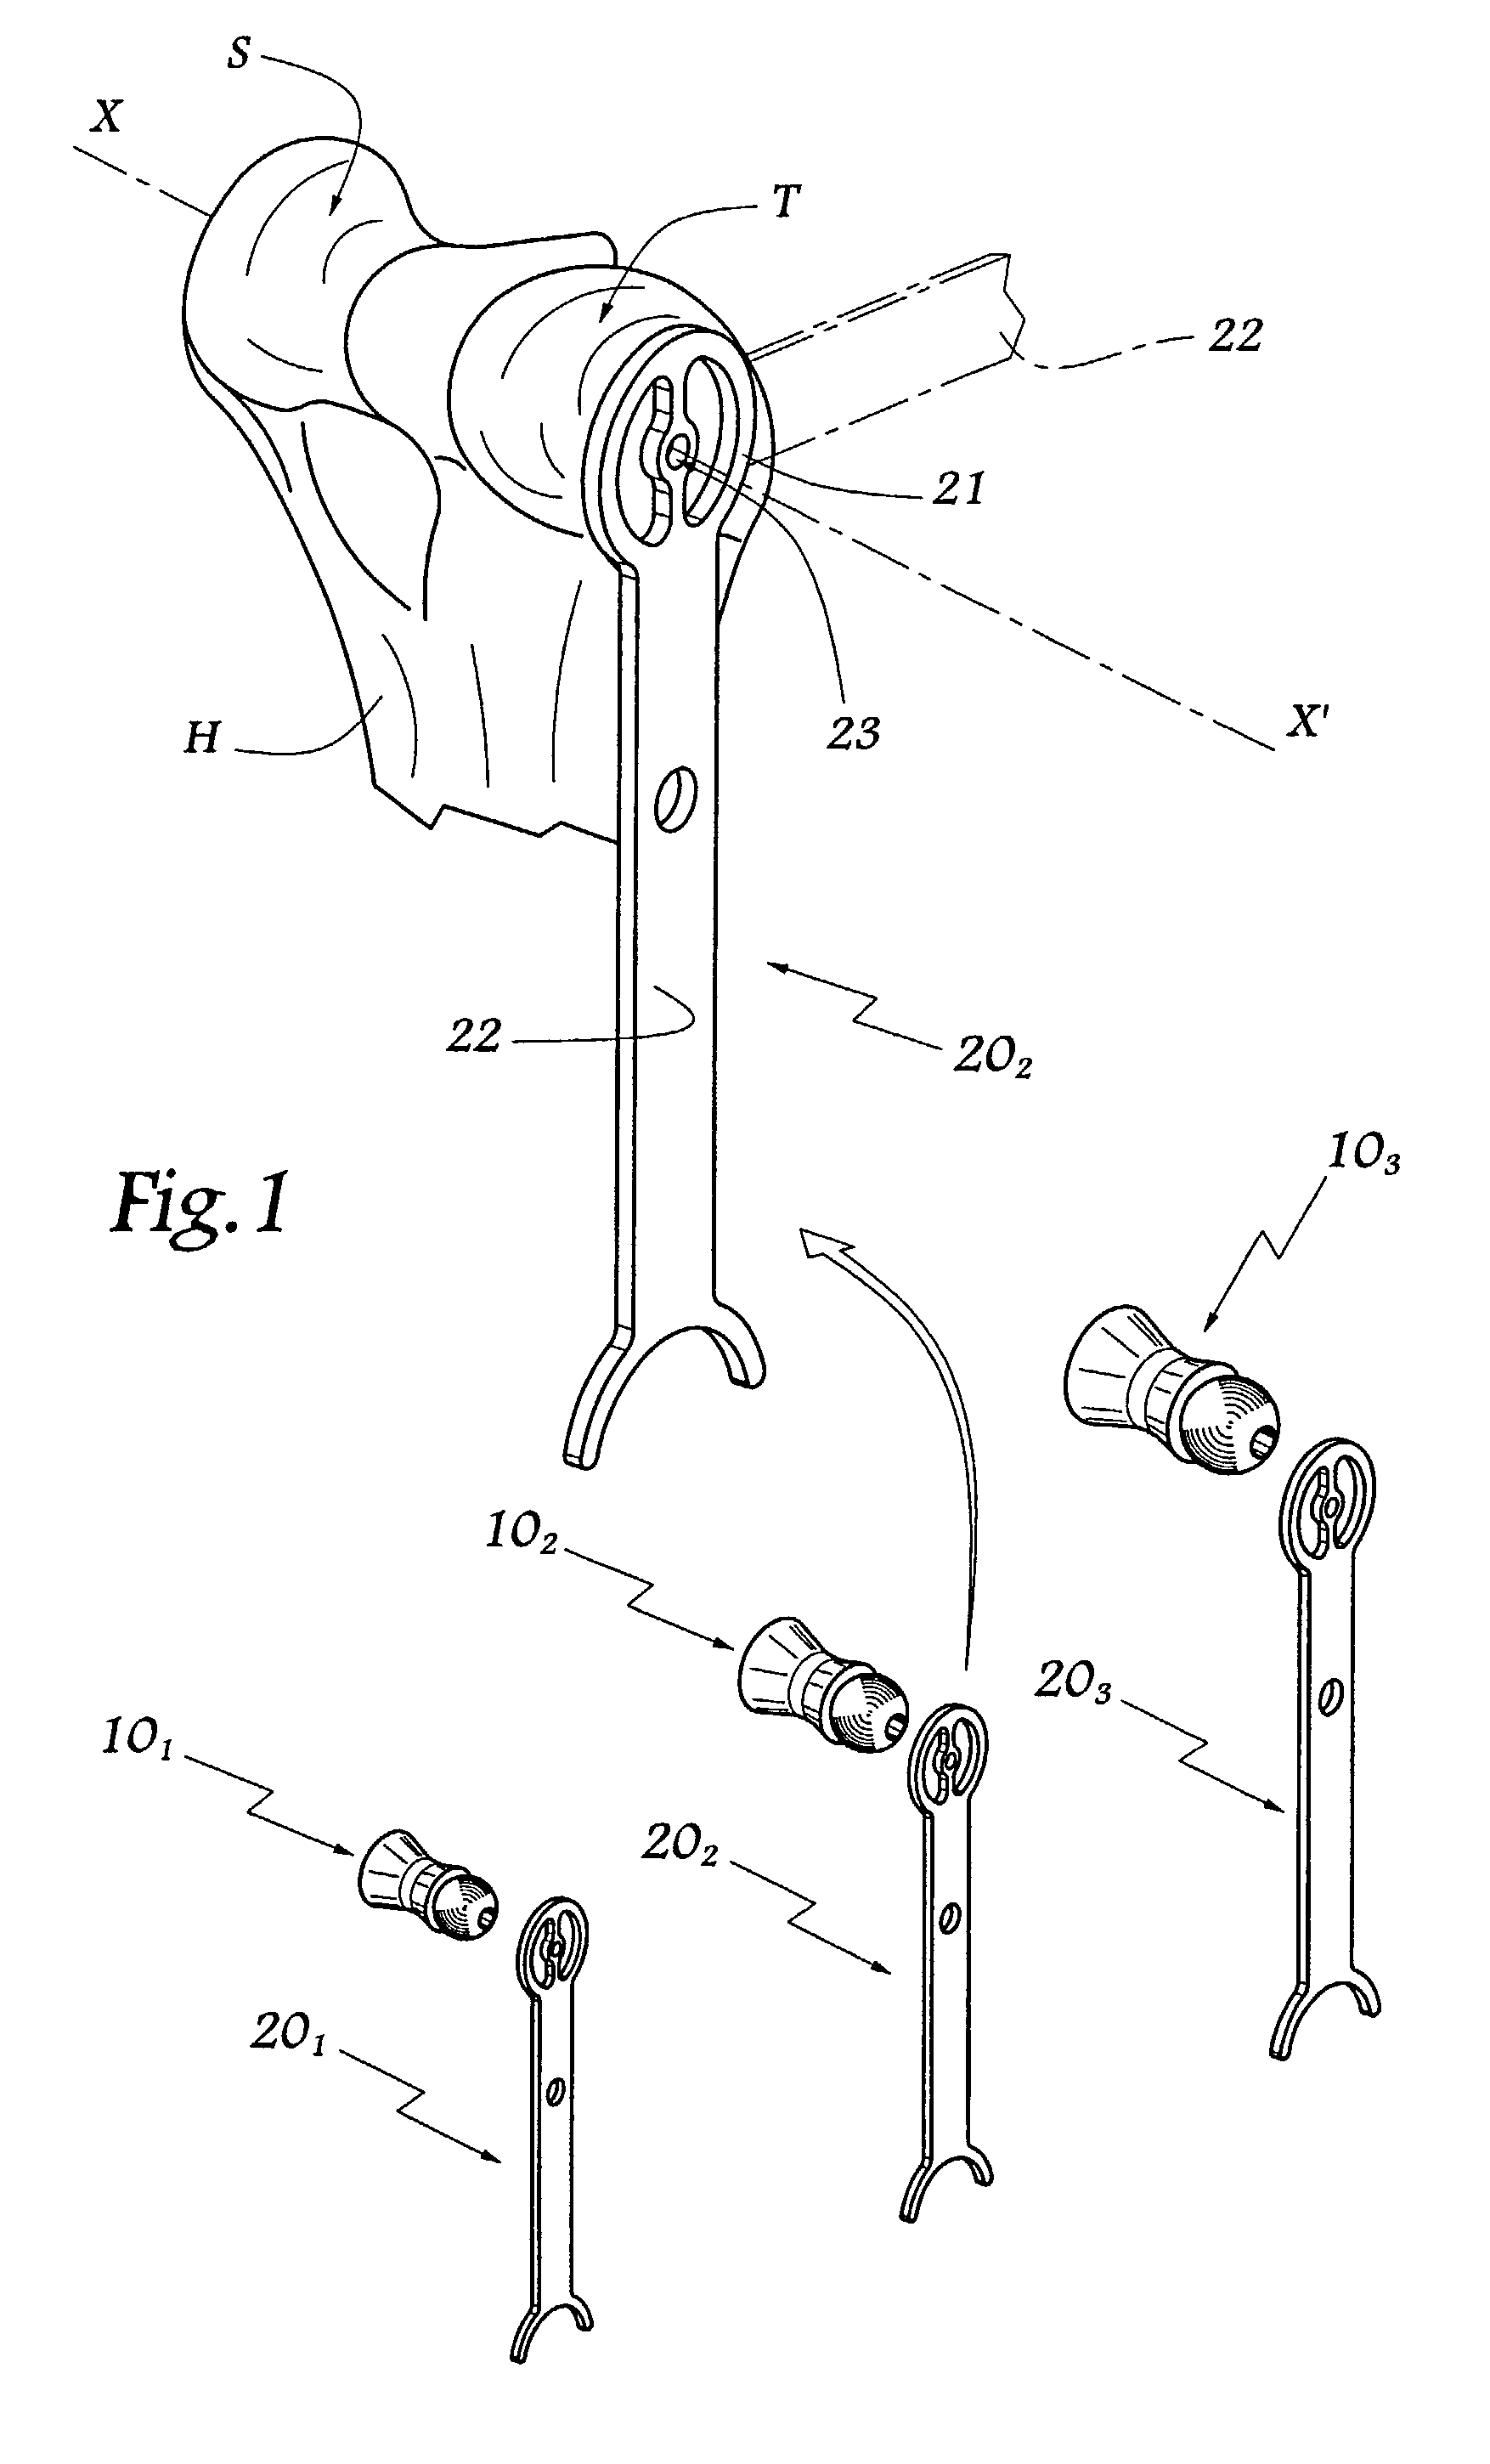 Ancillary tool for fitting a humeral component of an elbow prosthesis